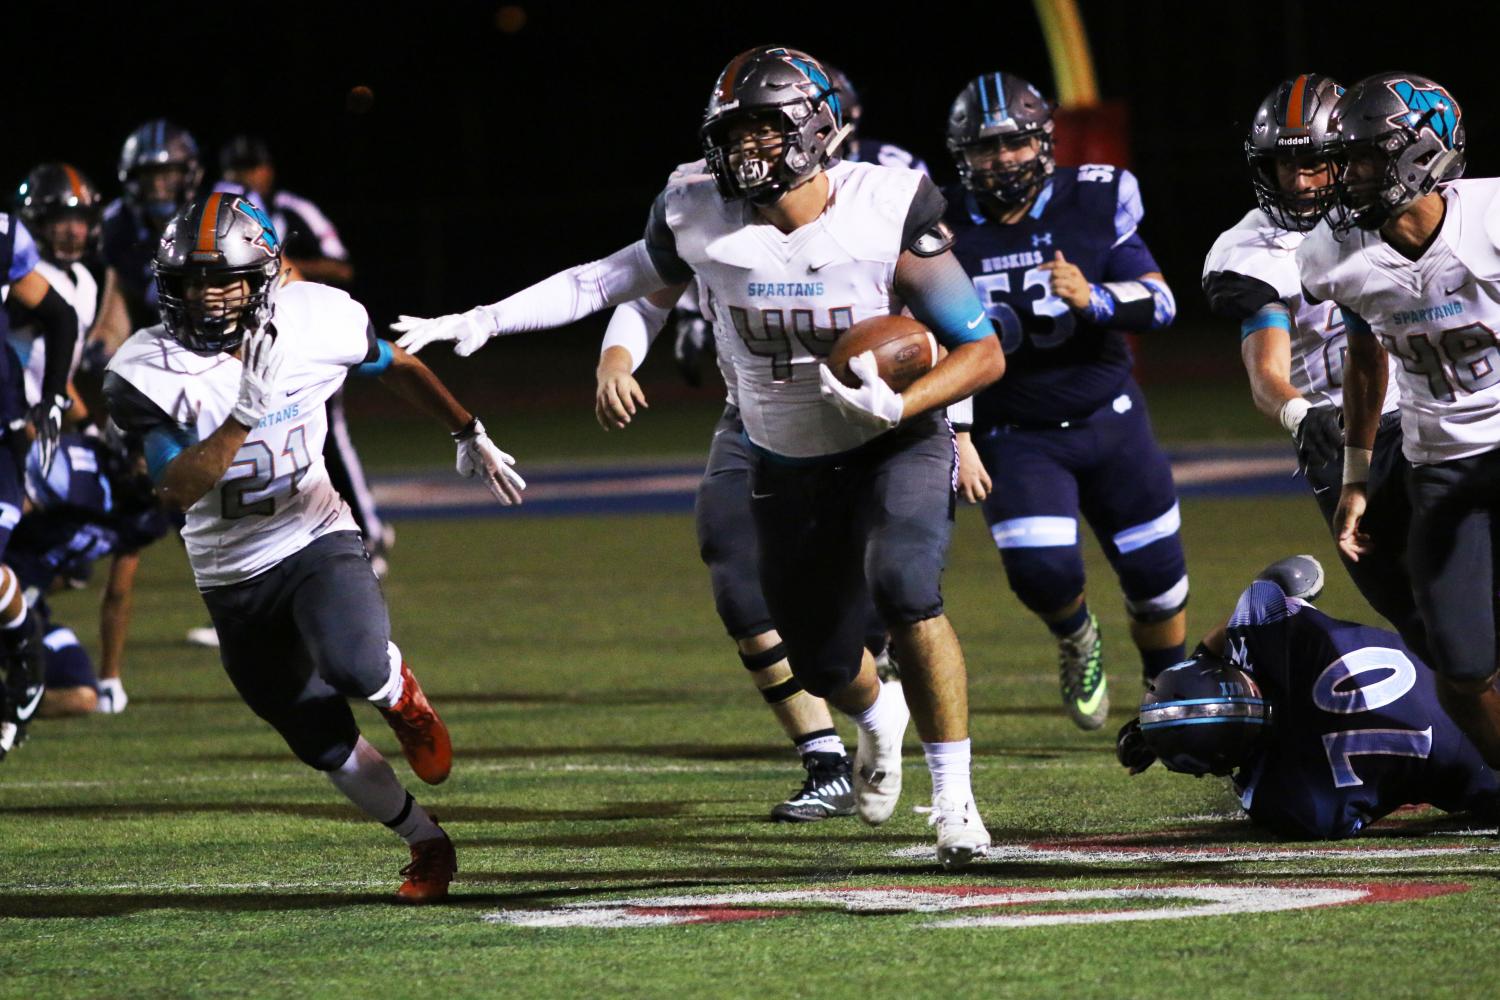 After recovering a fumble, Kevin Esquivel returns the ball for a touchdown as the Spartans defeat No. 2 Chapin, 31-14. 